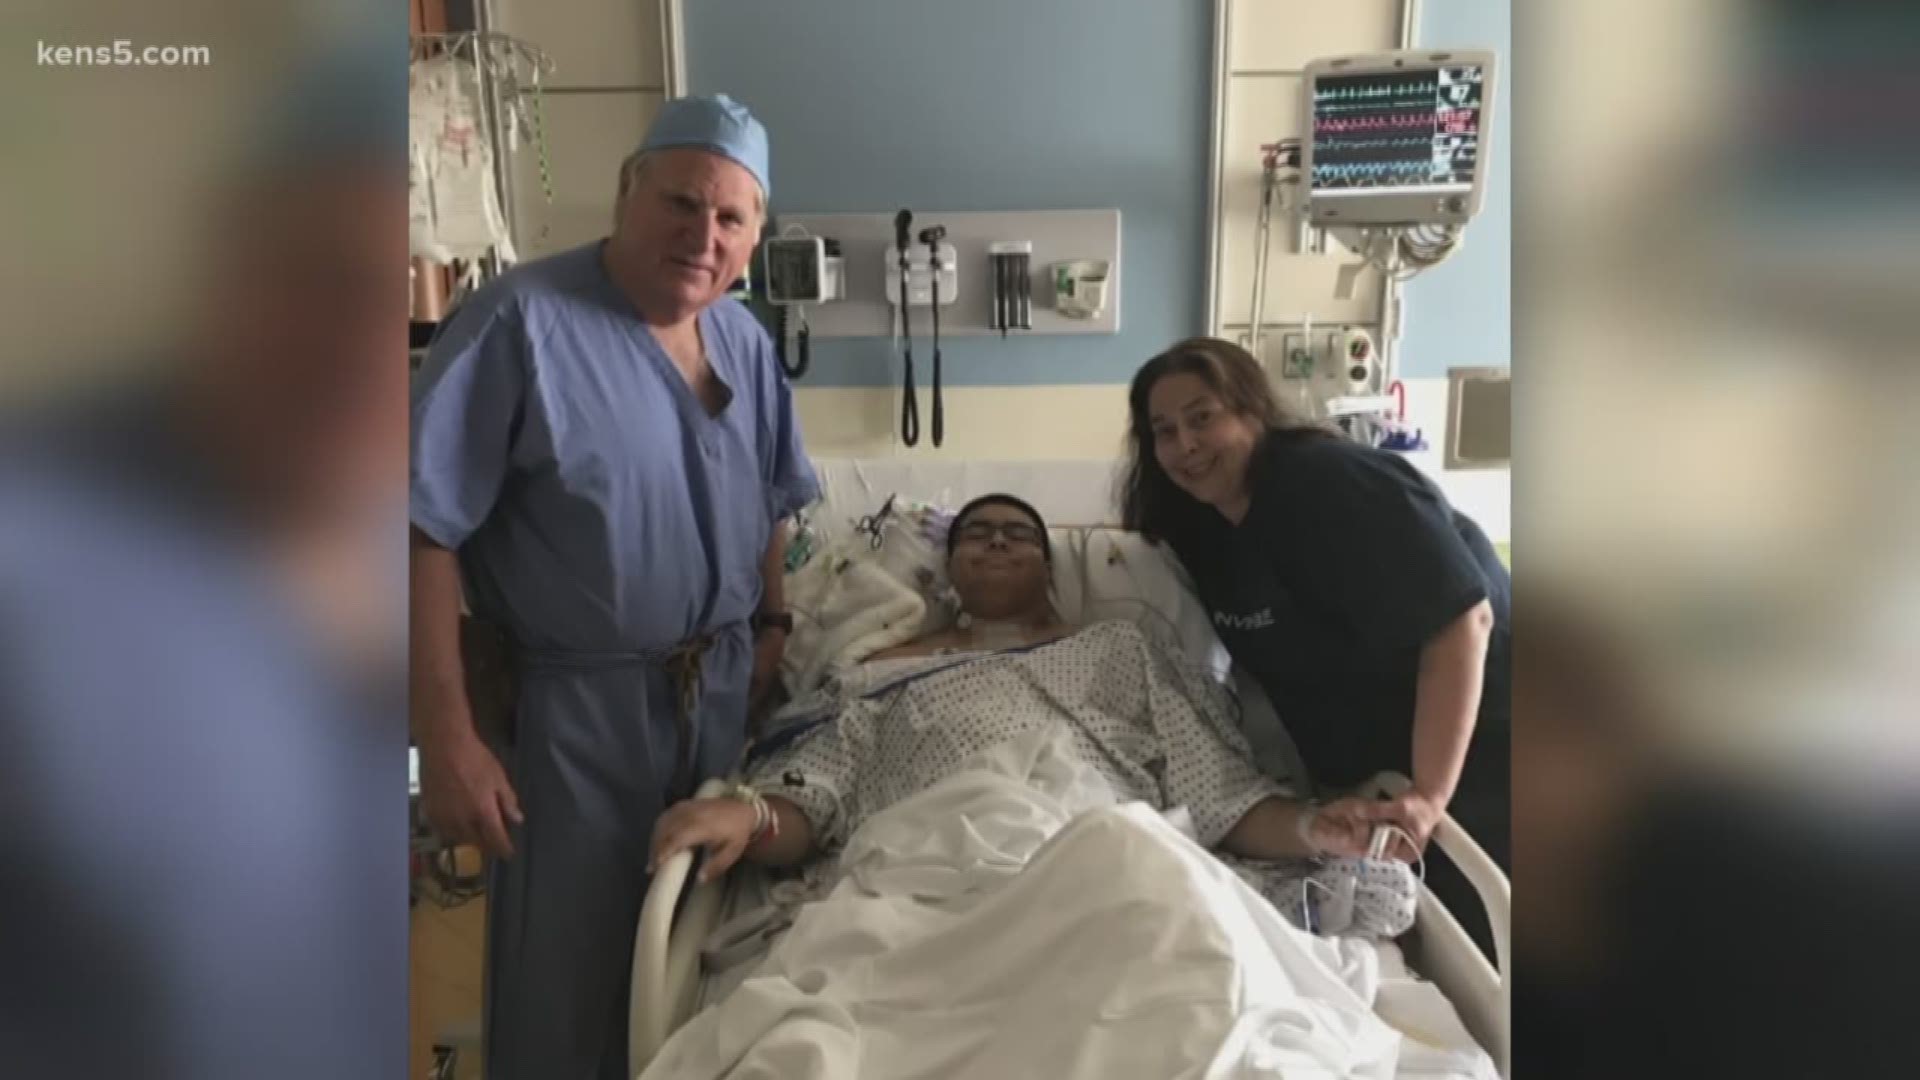 A 15-year-old San Antonio boy who has a heart defect is getting a second chance at life thanks to a brand new procedure he was the first to receive.